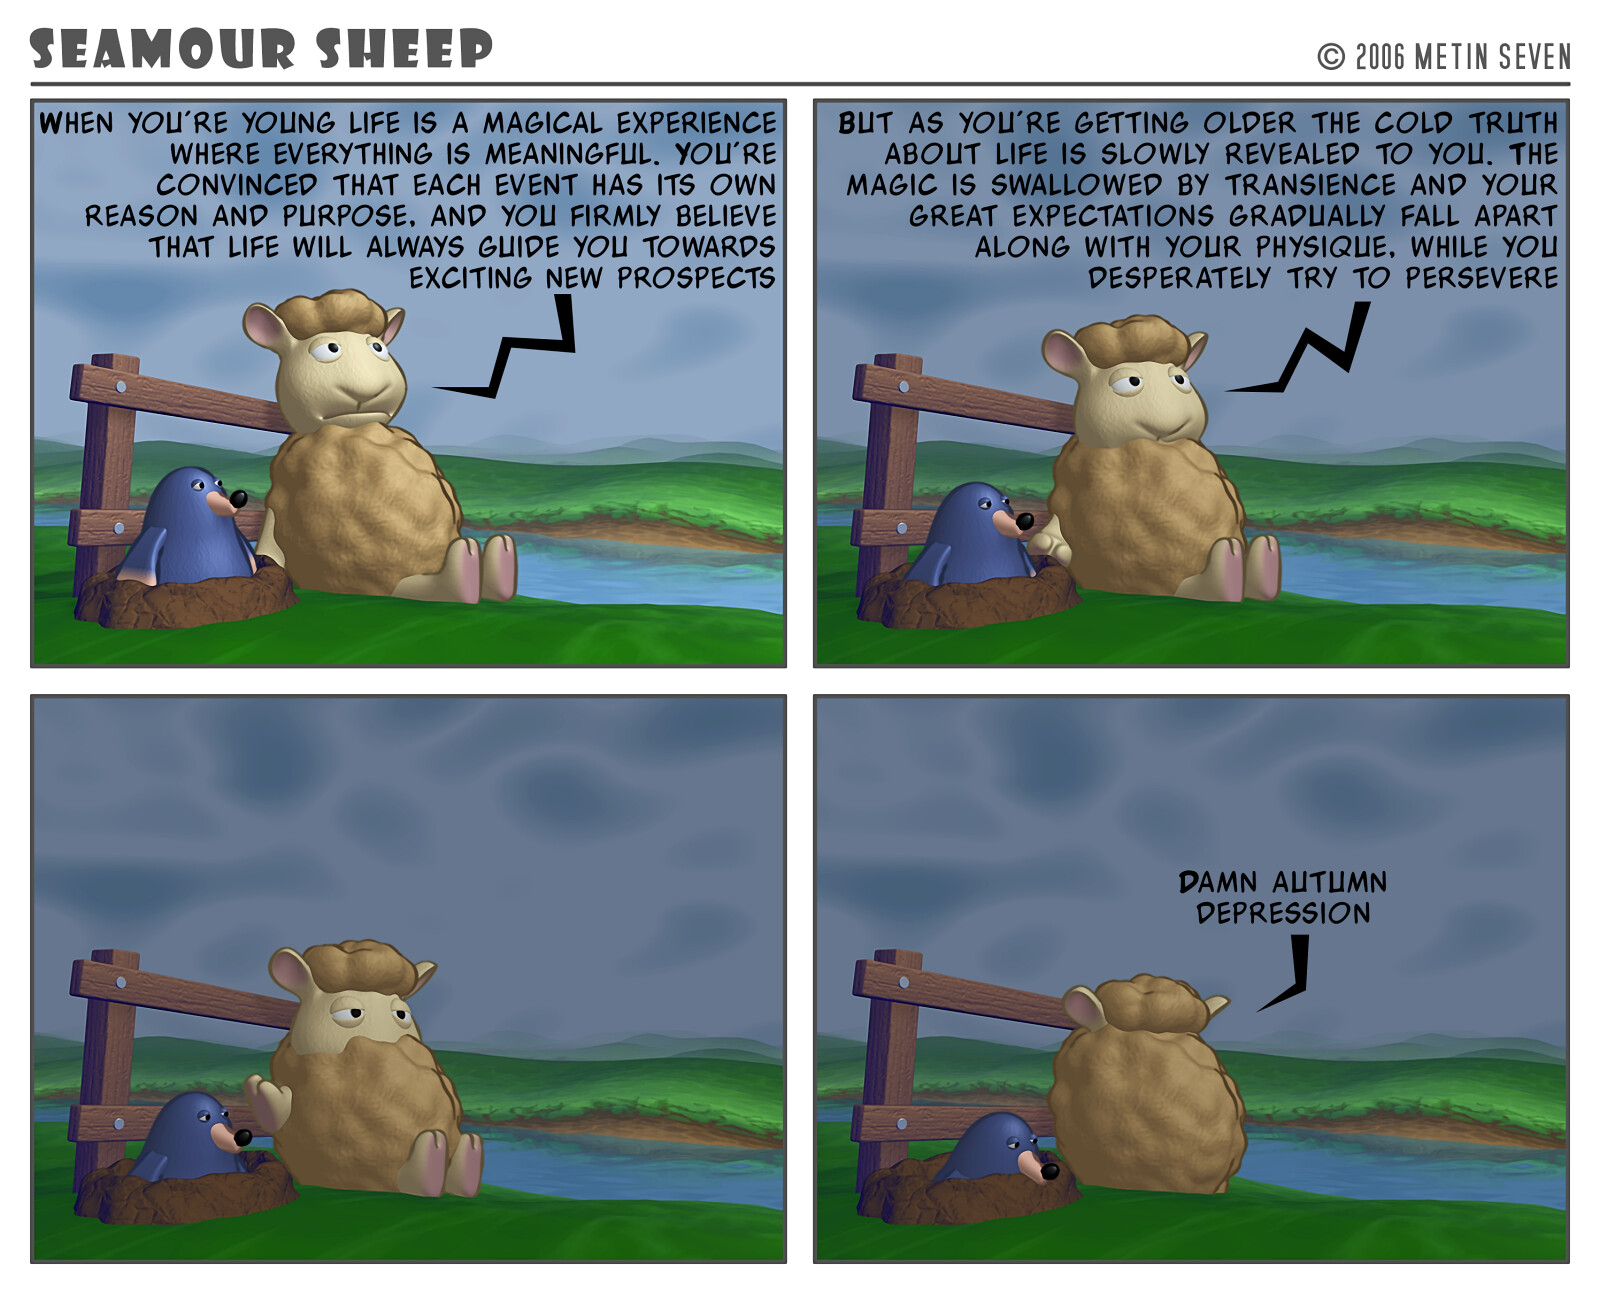 Seamour Sheep and Marty Mole comic strip episode: Depression